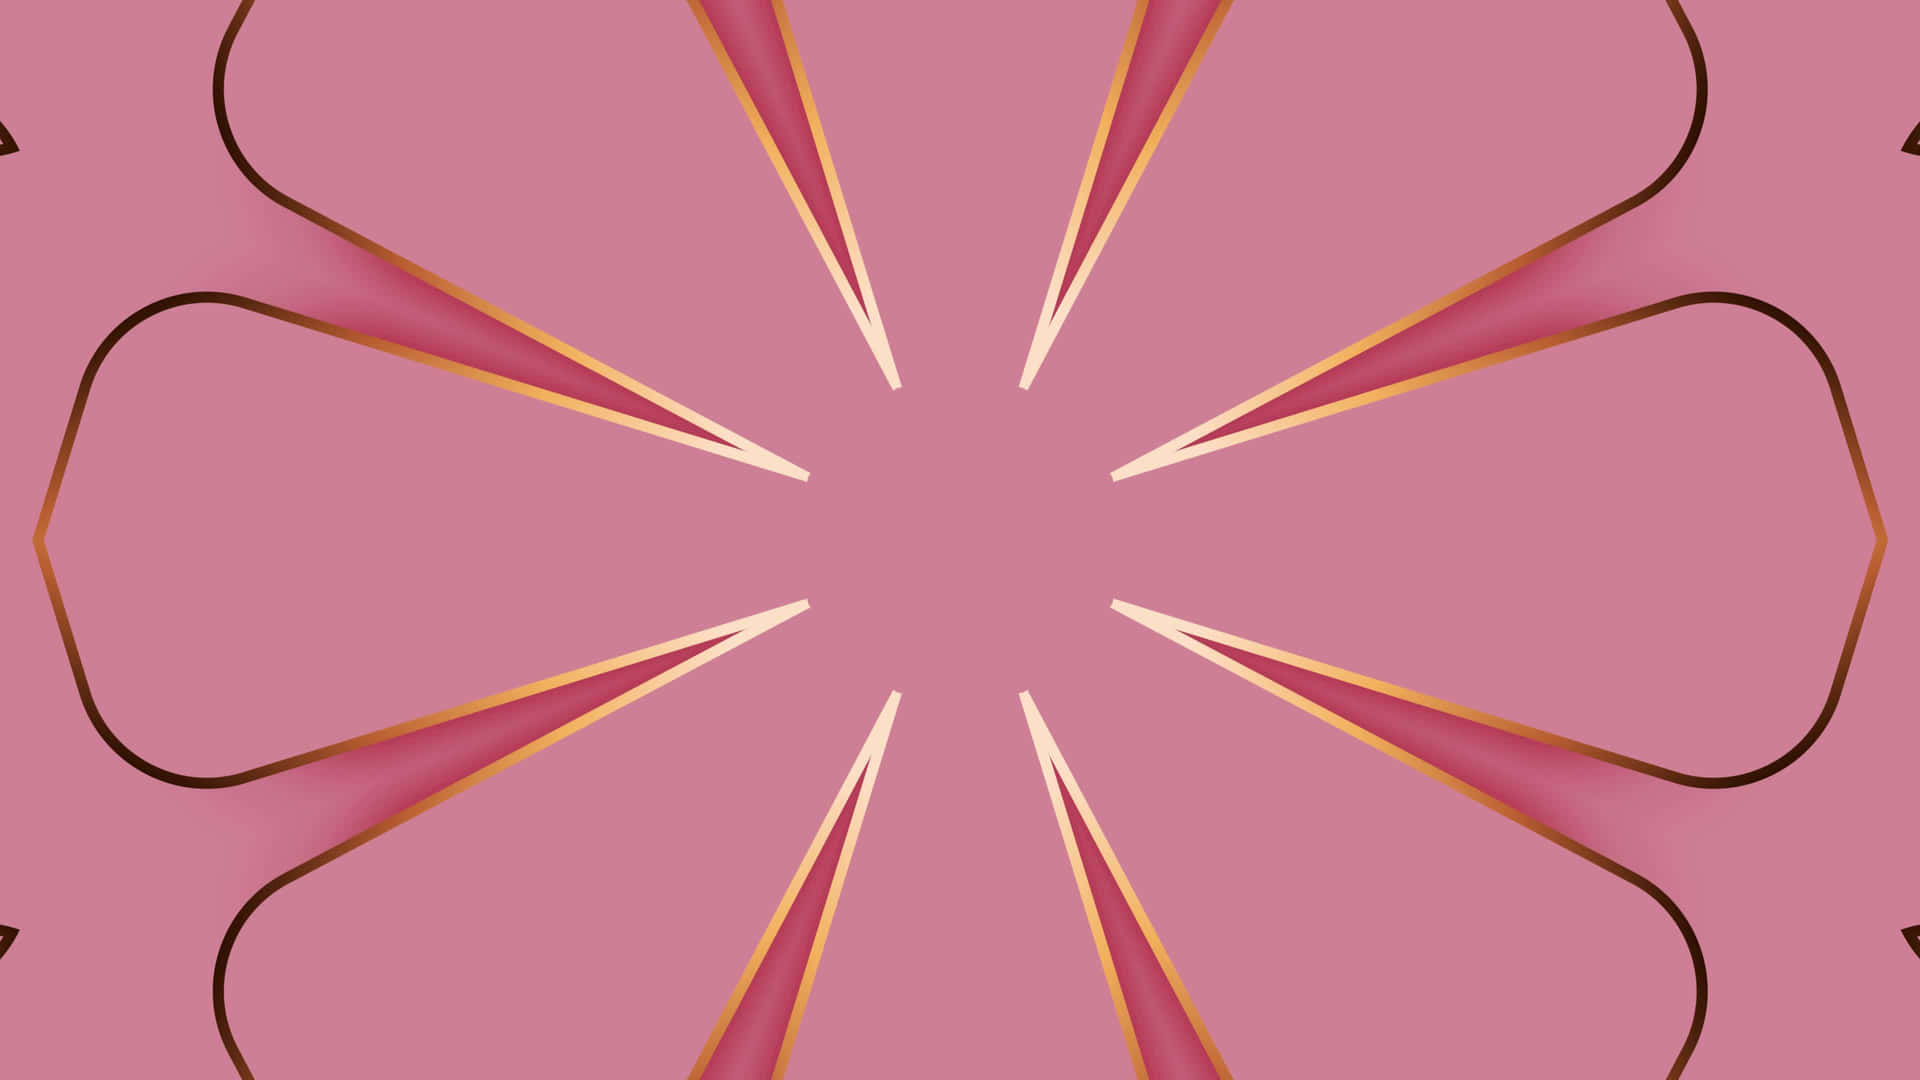 A Pink Flower With Gold Lines